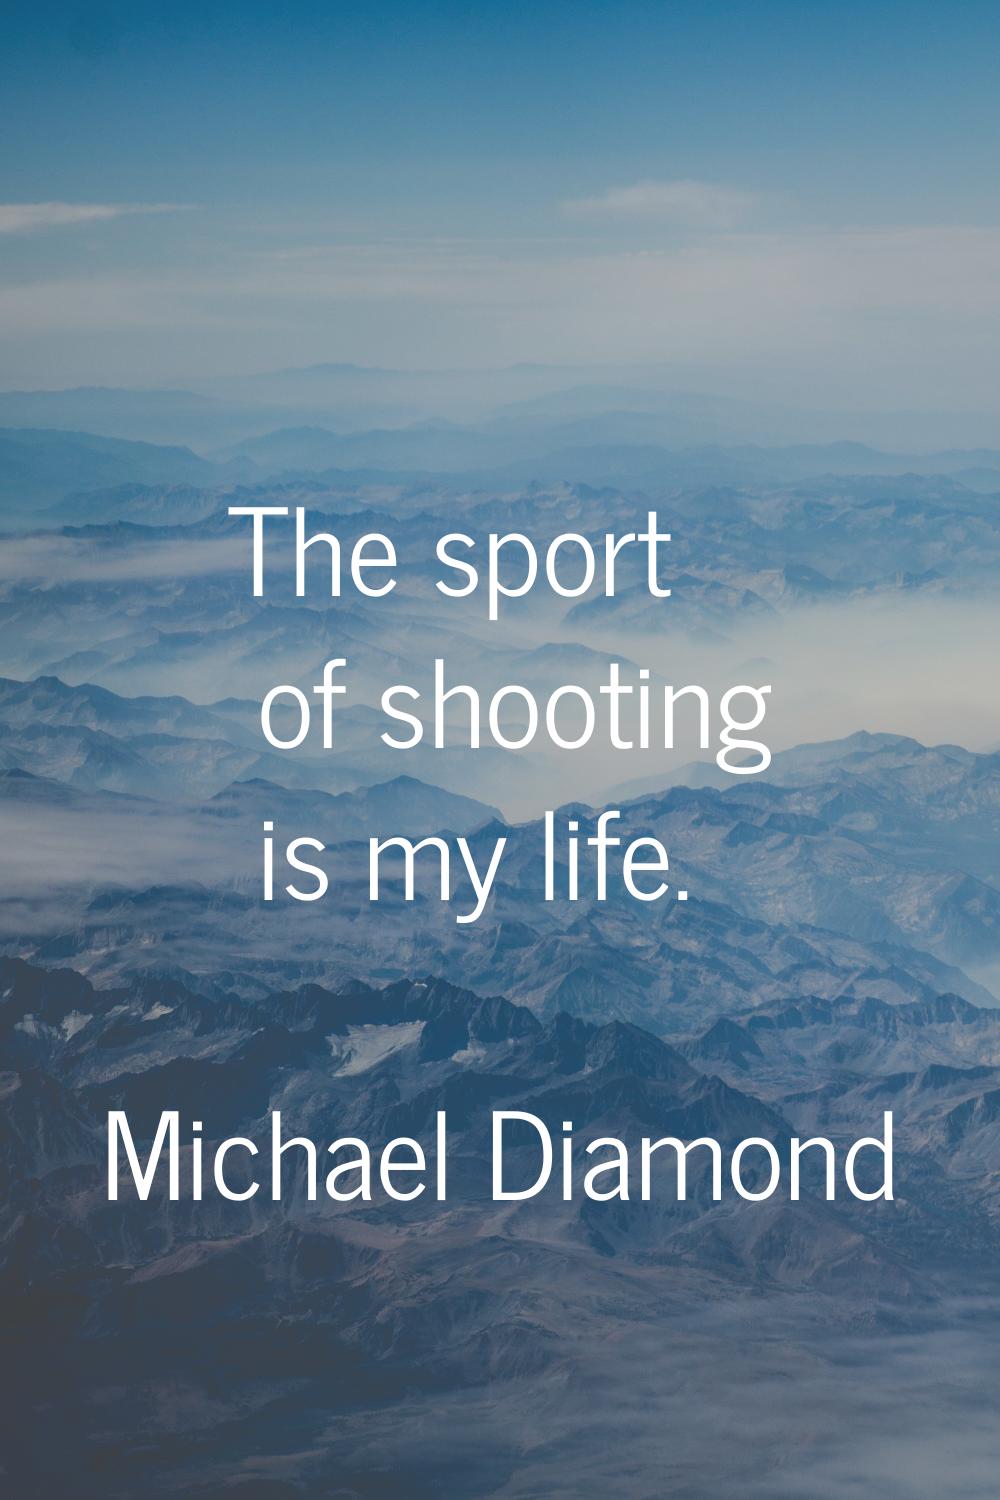 The sport of shooting is my life.